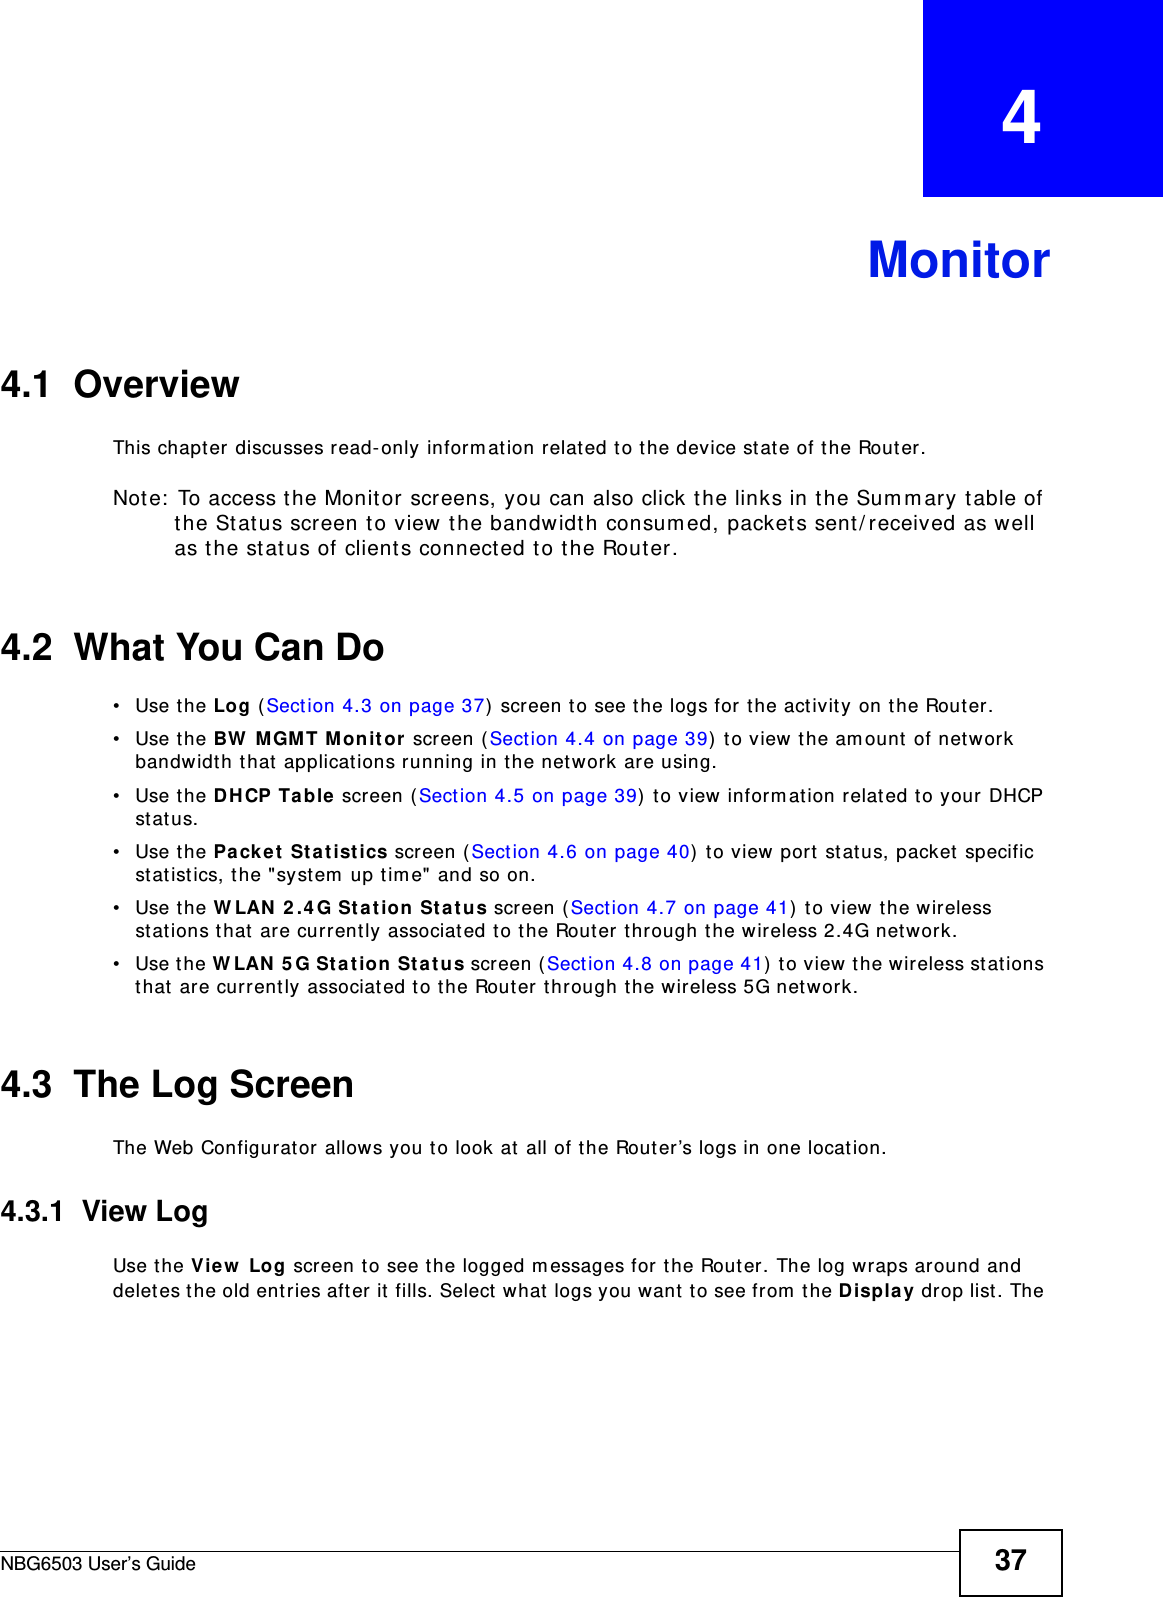 NBG6503 User’s Guide 37CHAPTER   4Monitor4.1  OverviewThis chapter discusses read-only information related to the device state of the Router. Note: To access the Monitor screens, you can also click the links in the Summary table of the Status screen to view the bandwidth consumed, packets sent/received as well as the status of clients connected to the Router.4.2  What You Can Do•Use the Log (Section 4.3 on page 37) screen to see the logs for the activity on the Router.•Use the BW MGMT Monitor screen (Section 4.4 on page 39) to view the amount of network bandwidth that applications running in the network are using.•Use the DHCP Table screen (Section 4.5 on page 39) to view information related to your DHCP status.•Use the Packet Statistics screen (Section 4.6 on page 40) to view port status, packet specific statistics, the &quot;system up time&quot; and so on.•Use the WLAN 2.4G Station Status screen (Section 4.7 on page 41) to view the wireless stations that are currently associated to the Router through the wireless 2.4G network.•Use the WLAN 5G Station Status screen (Section 4.8 on page 41) to view the wireless stations that are currently associated to the Router through the wireless 5G network.4.3  The Log ScreenThe Web Configurator allows you to look at all of the Router’s logs in one location.4.3.1  View LogUse the View Log screen to see the logged messages for the Router. The log wraps around and deletes the old entries after it fills. Select what logs you want to see from the Display drop list. The 